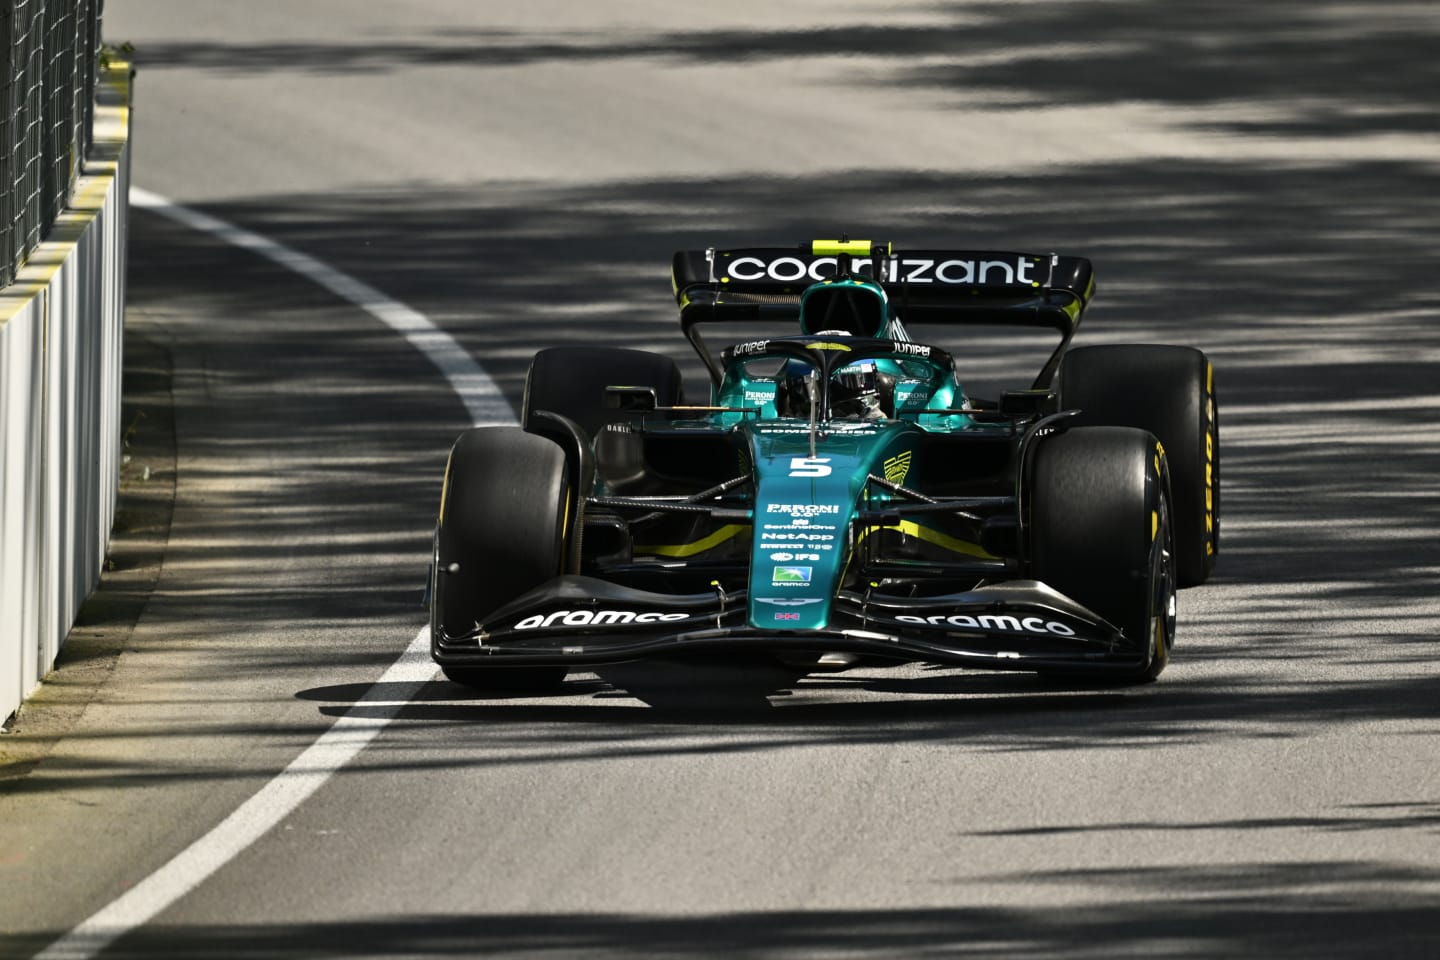 MONTREAL, QUEBEC - JUNE 17: Sebastian Vettel of Germany driving the (5) Aston Martin AMR22 Mercedes on track during practice ahead of the F1 Grand Prix of Canada at Circuit Gilles Villeneuve on June 17, 2022 in Montreal, Quebec. (Photo by Minas Panagiotakis/Getty Images)